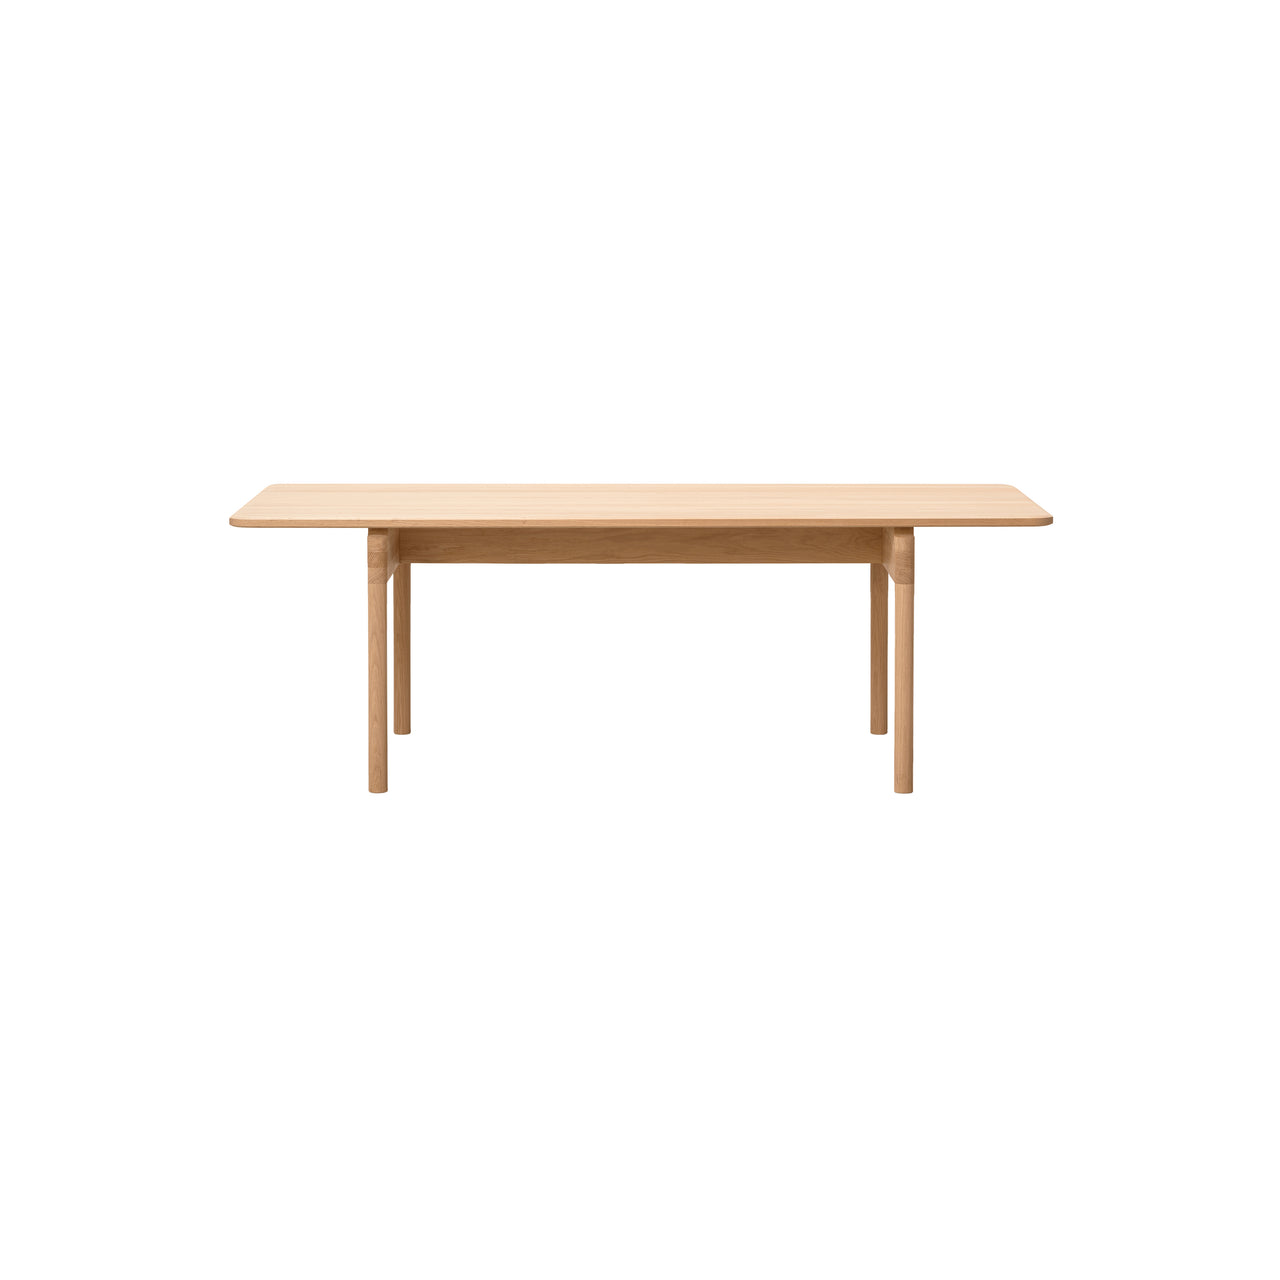 Post Dining Table: Small - 88.6